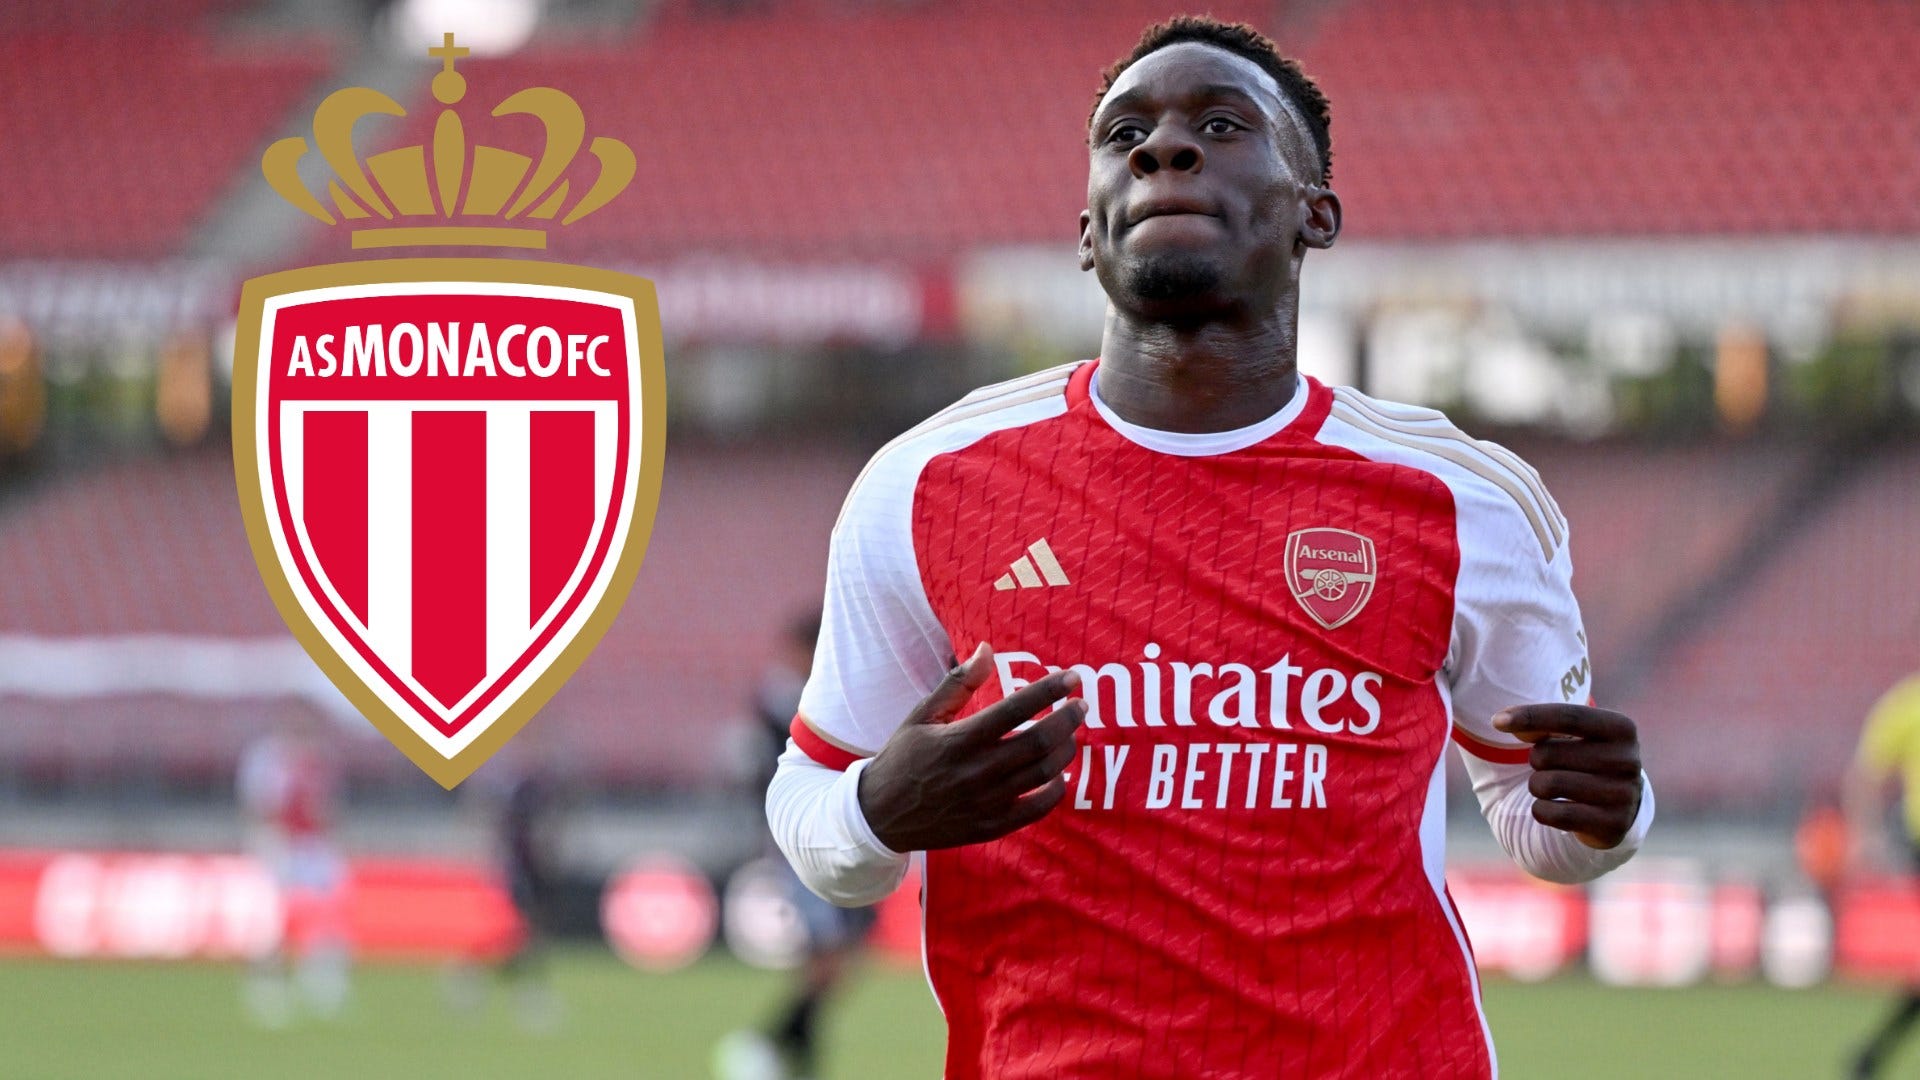 A sideways move or the hop before a leap? The risks and rewards of USMNT star Folarin Balogun’s $43 million Monaco transfer